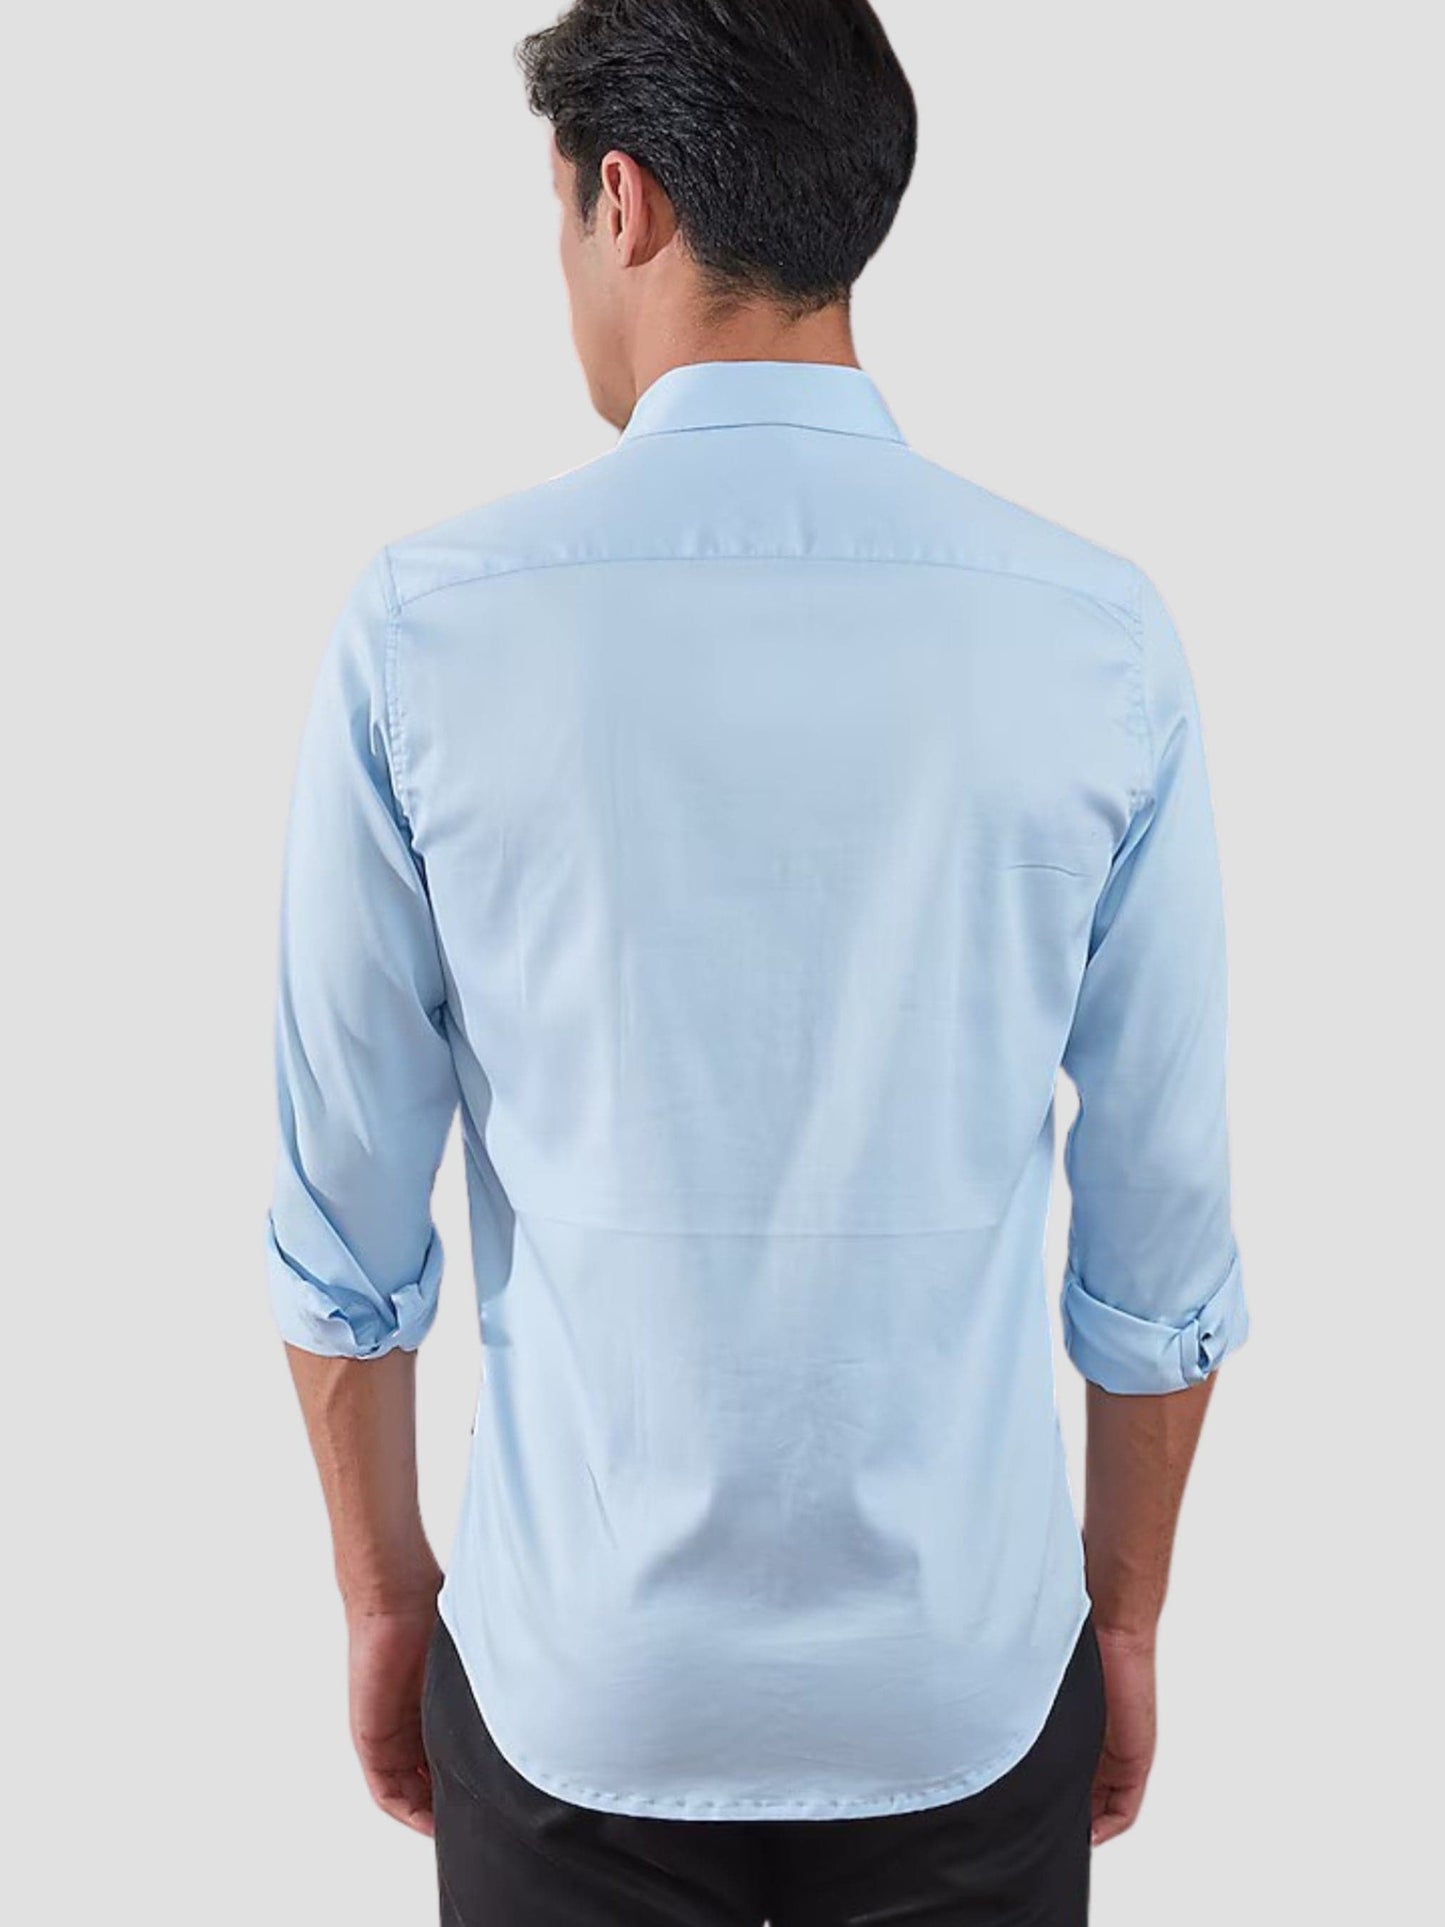 Harness Style Spread Collar Cotton Casual Shirt